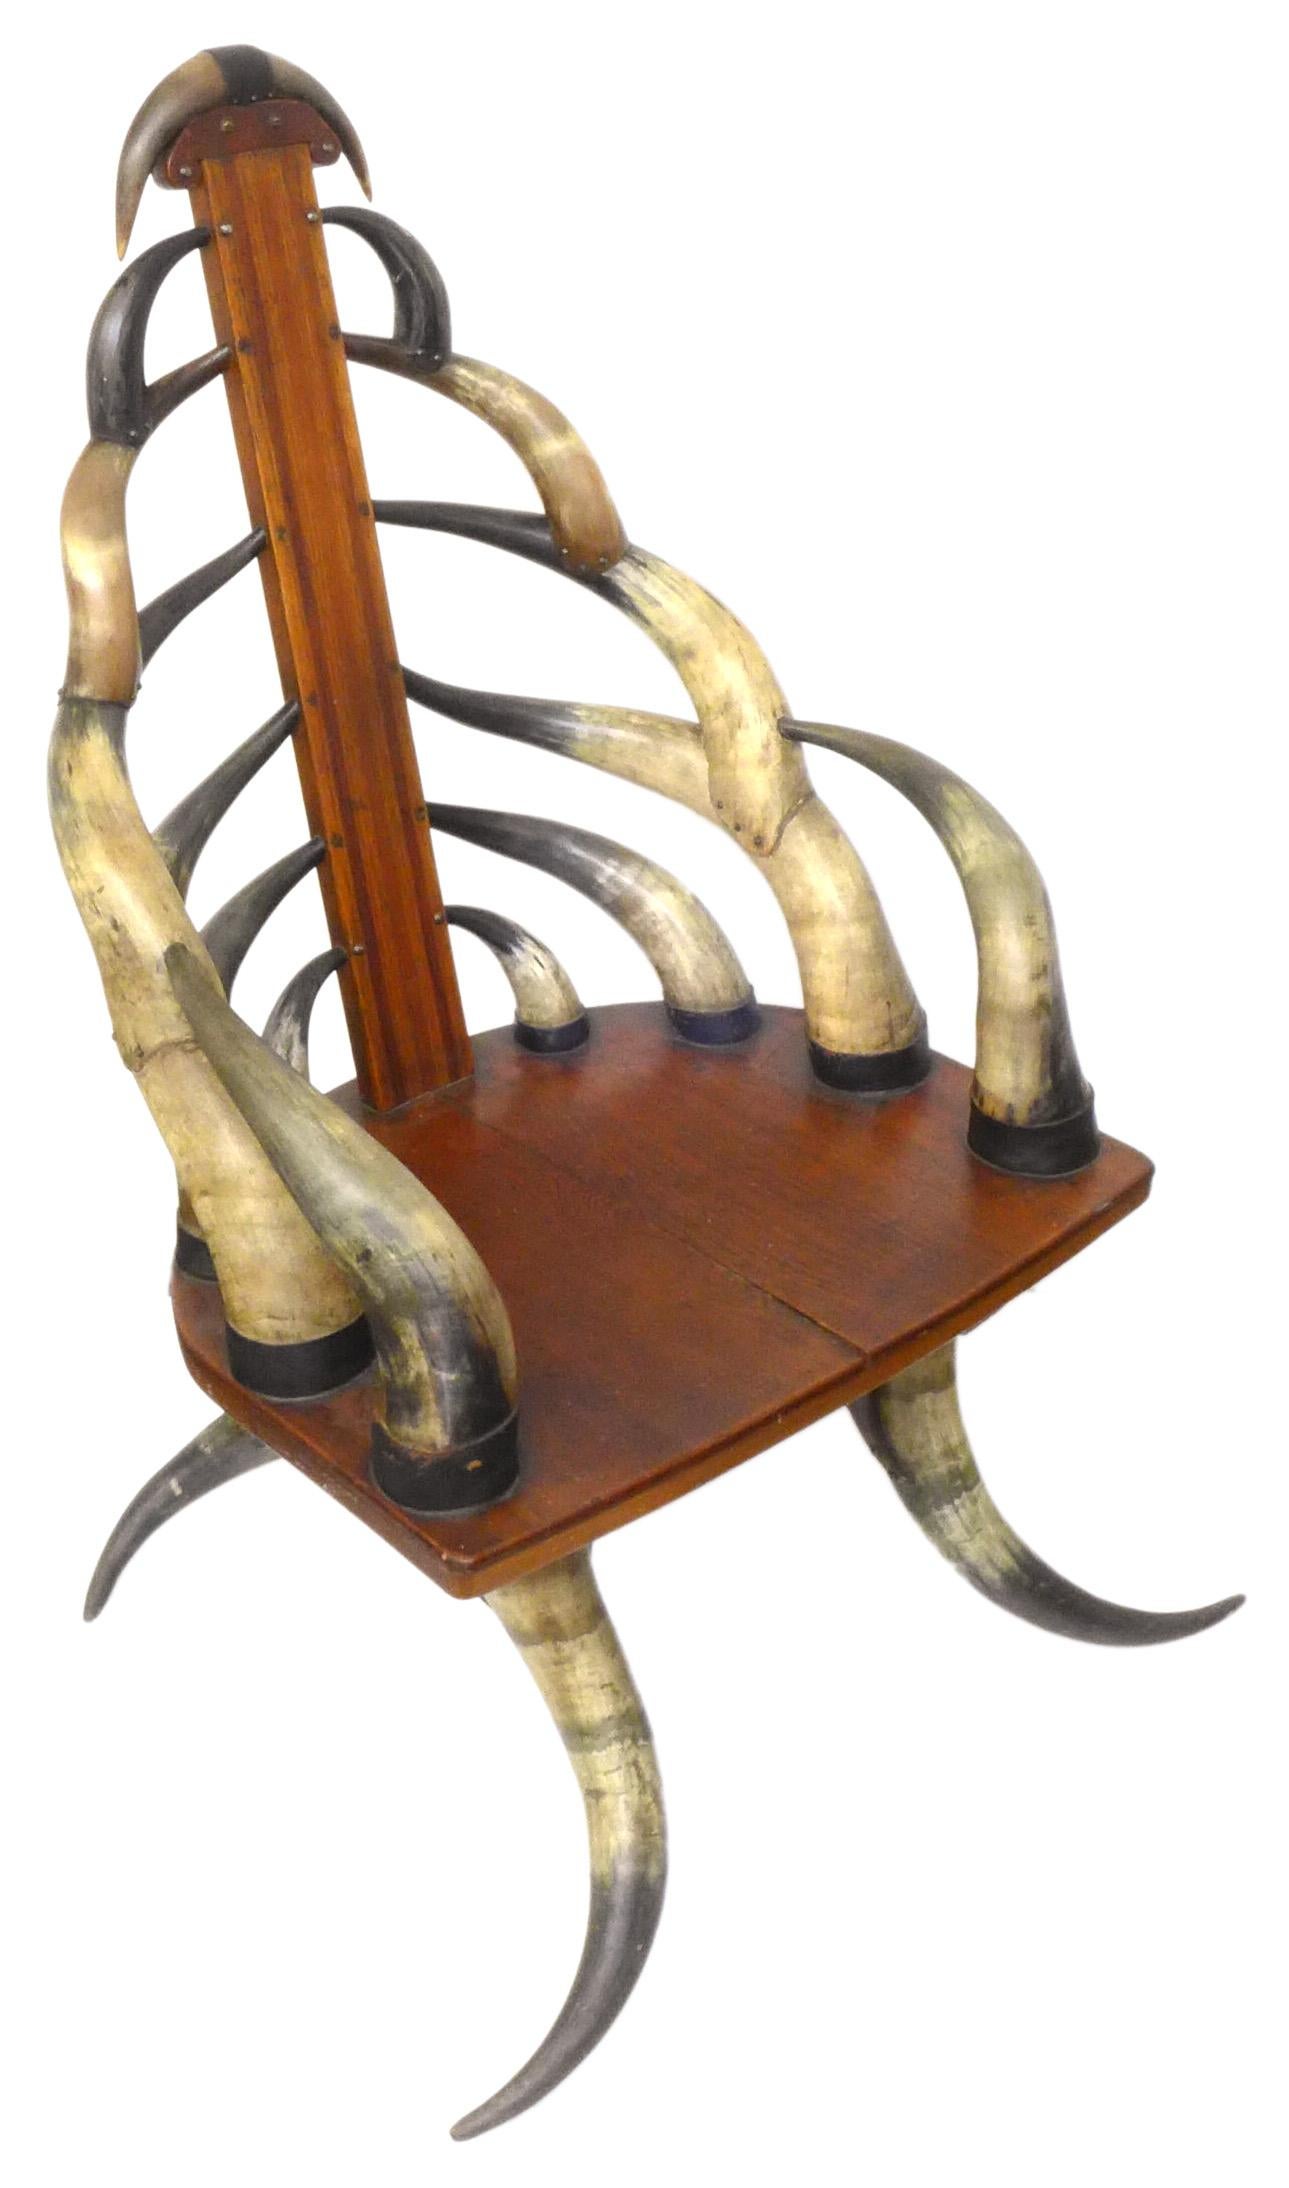 An outstanding turn-of-the-century steer-Horn armchair. A wonderful rendition of a notable niche in Americana decorative furniture; a beautifully symmetrical edifice of over two dozen variously-sized, artfully-joined steer horns with laminated-wood